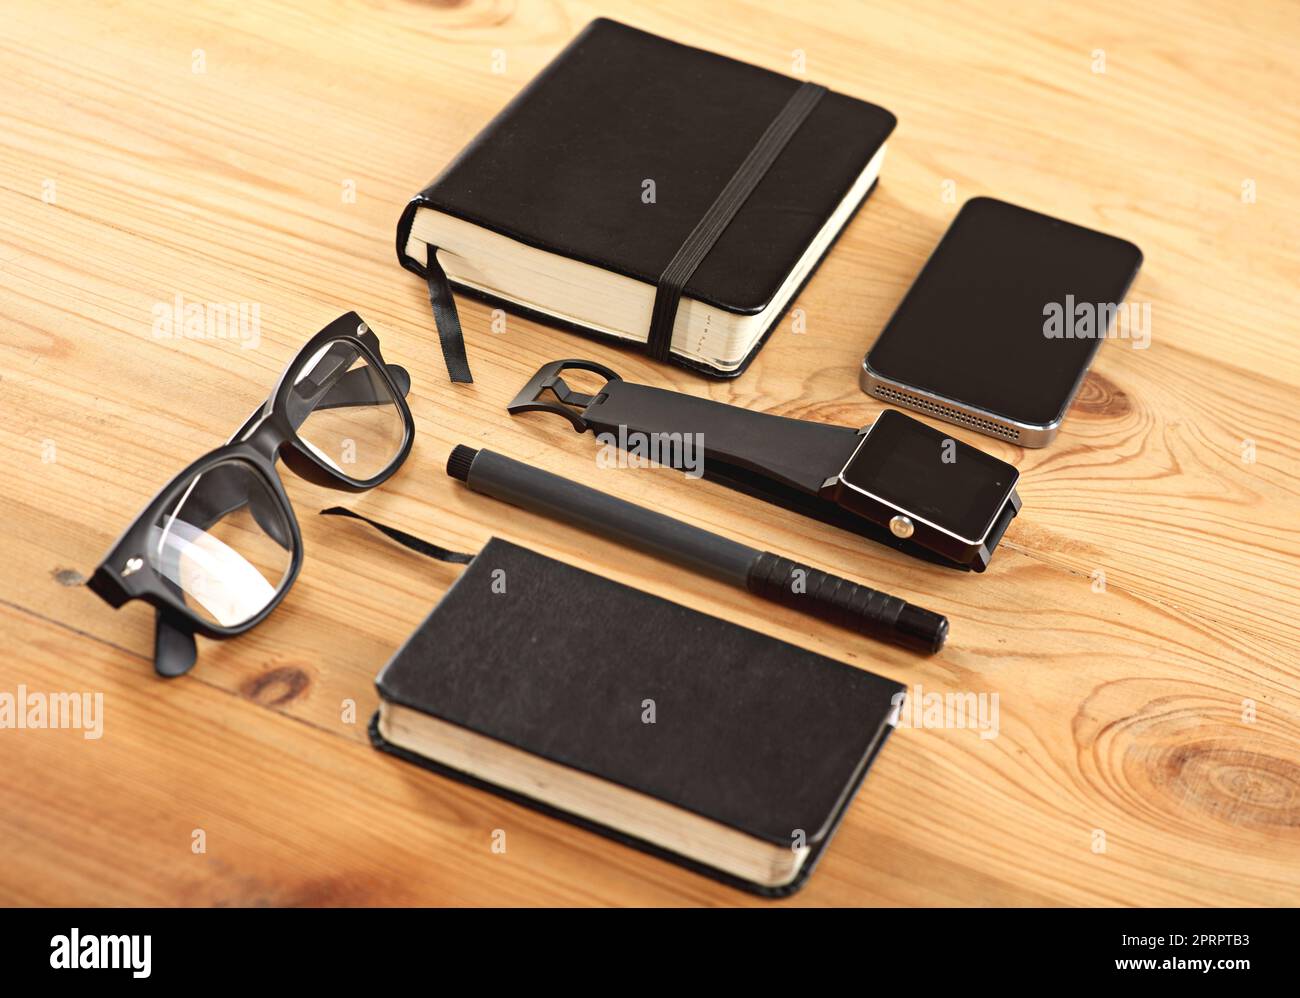 Lifes little helpers. A group of everyday objects and devices. Stock Photo